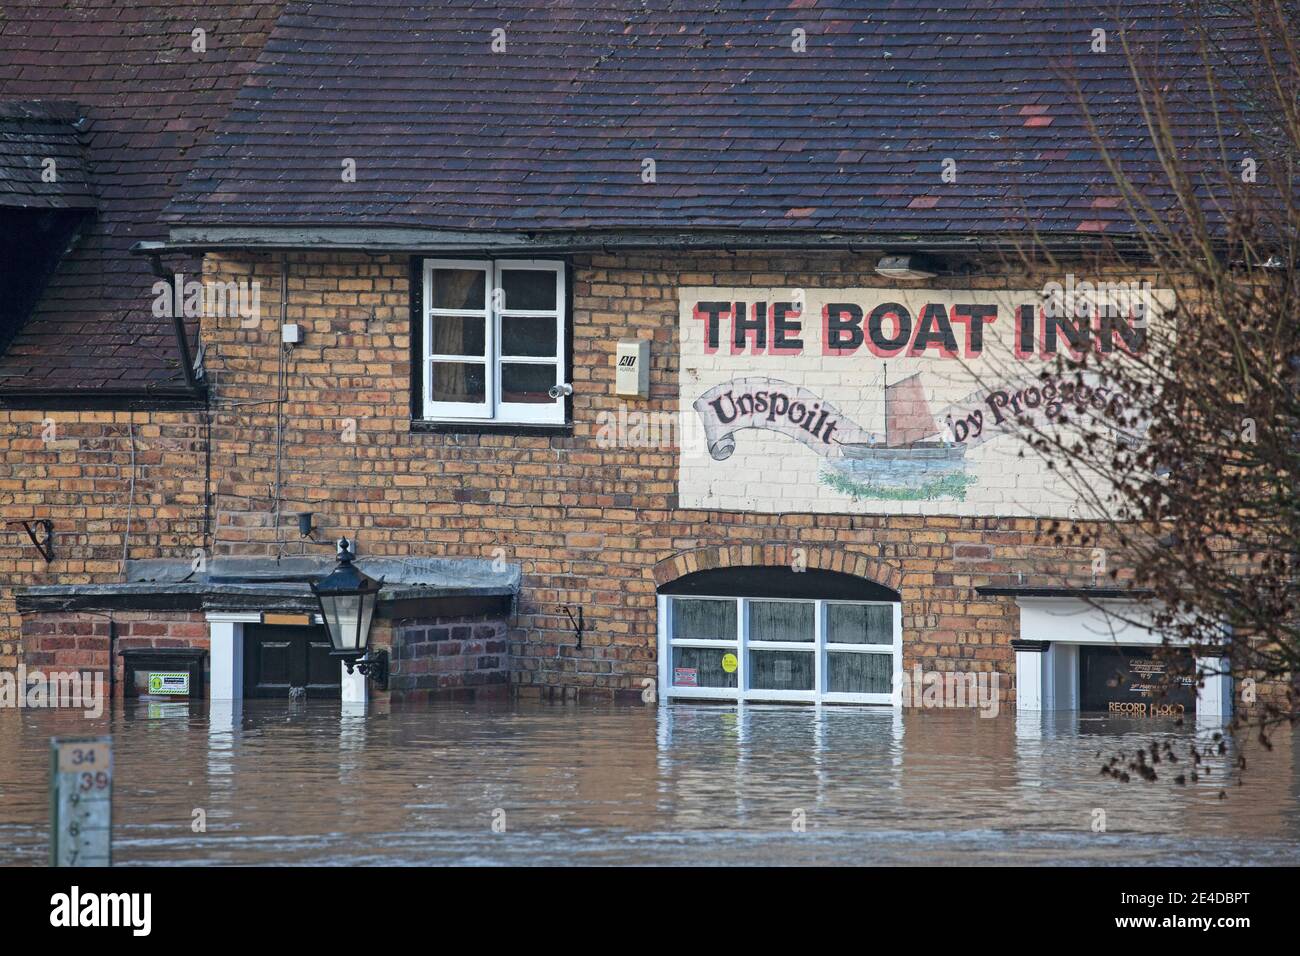 Shropshire, UK. 23rd Jan, 2021.  Levels of the River Severn in Shropshire continued to rise overnight, causing sever floods in certain areas. The village of Jackfield in the Ironbridge Gorge World Heritage Site has been particularly badly hit, with homes and businesses badly flooded. Levels are very close to the records floods of February 2020. Credit: Rob Carter/Alamy Live News Stock Photo